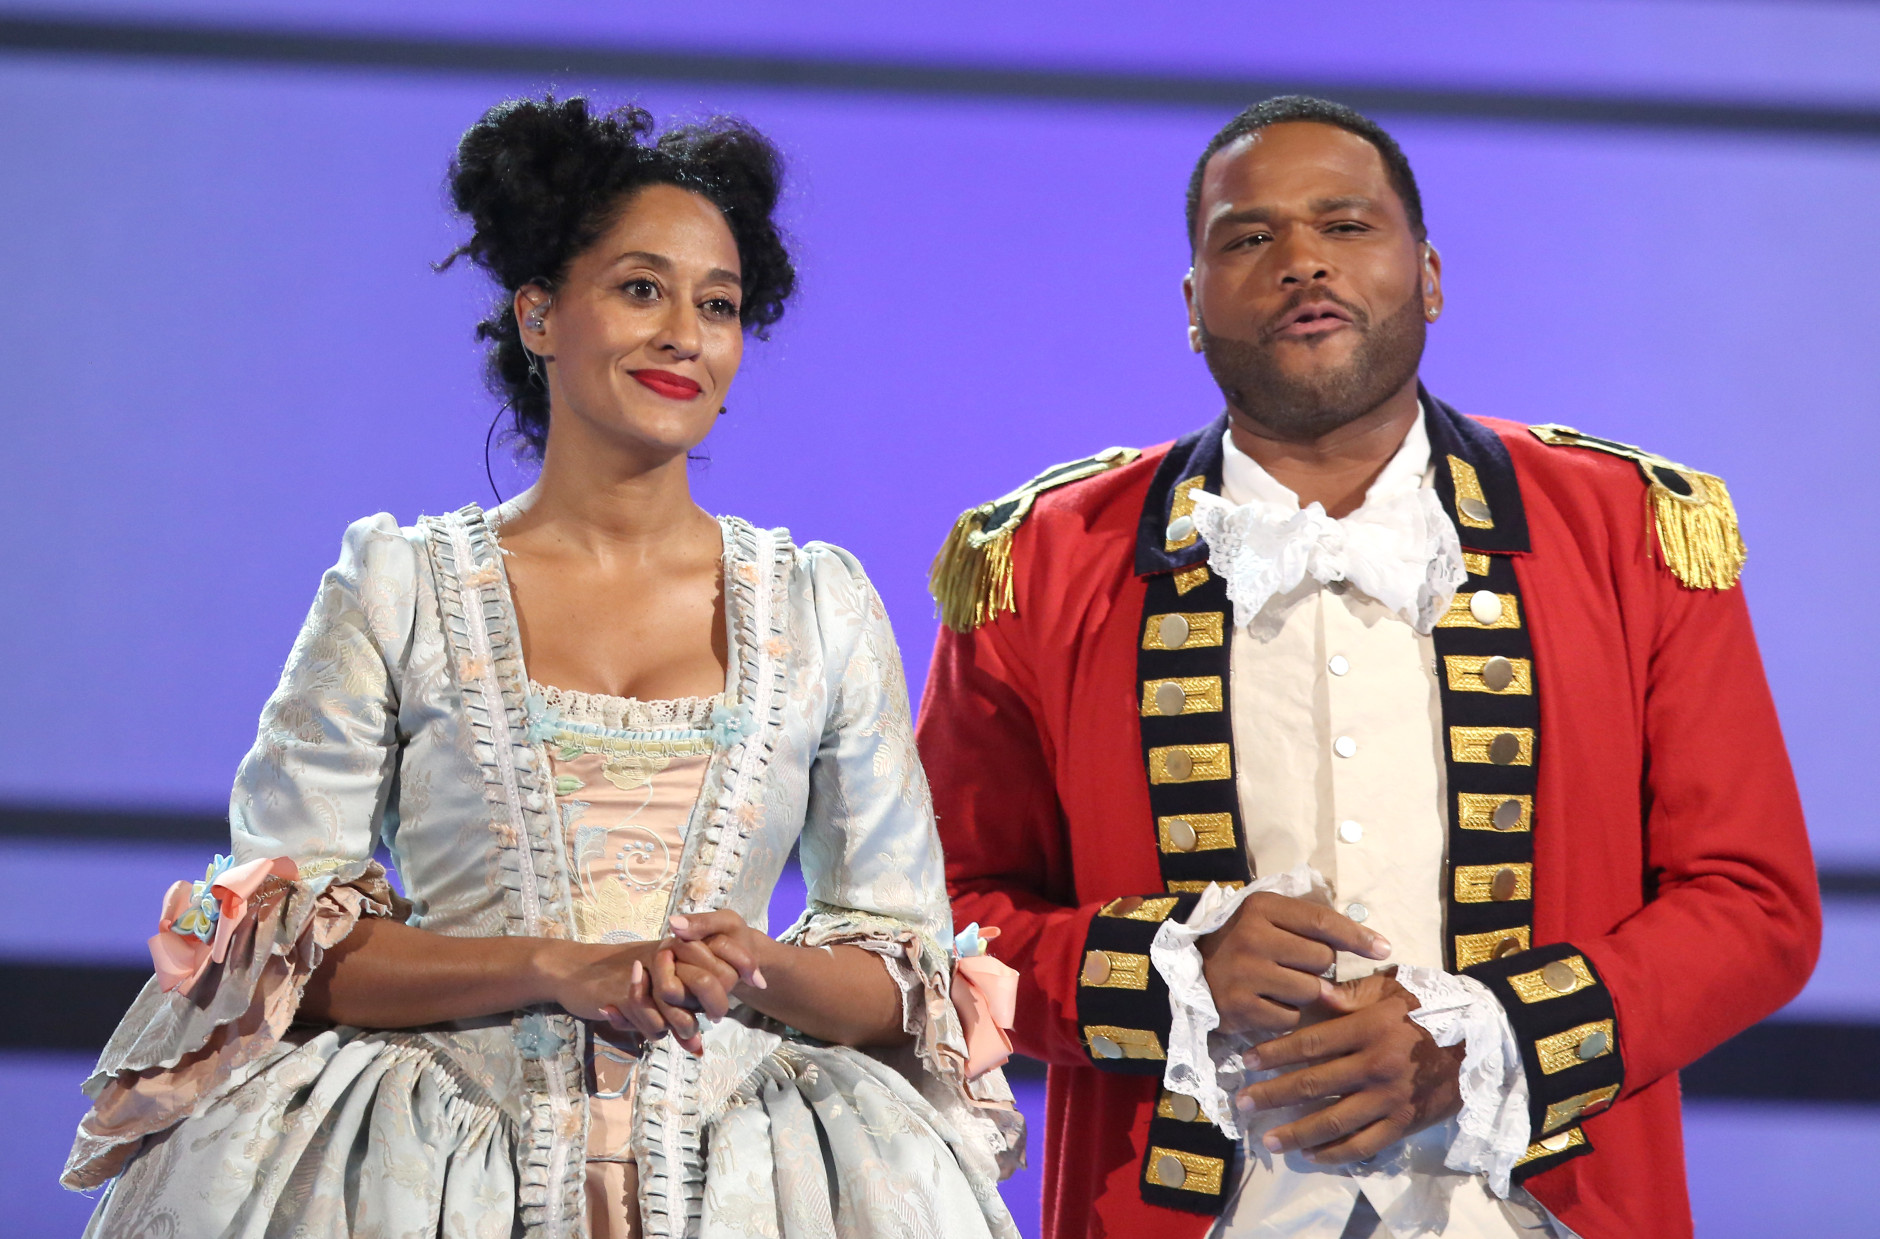 Hosts Tracee Ellis Ross, left, and Anthony Anderson perform a skit dressed as characters from the musical Hamilton at the BET Awards at the Microsoft Theater on Sunday, June 26, 2016, in Los Angeles. (Photo by Matt Sayles/Invision/AP)